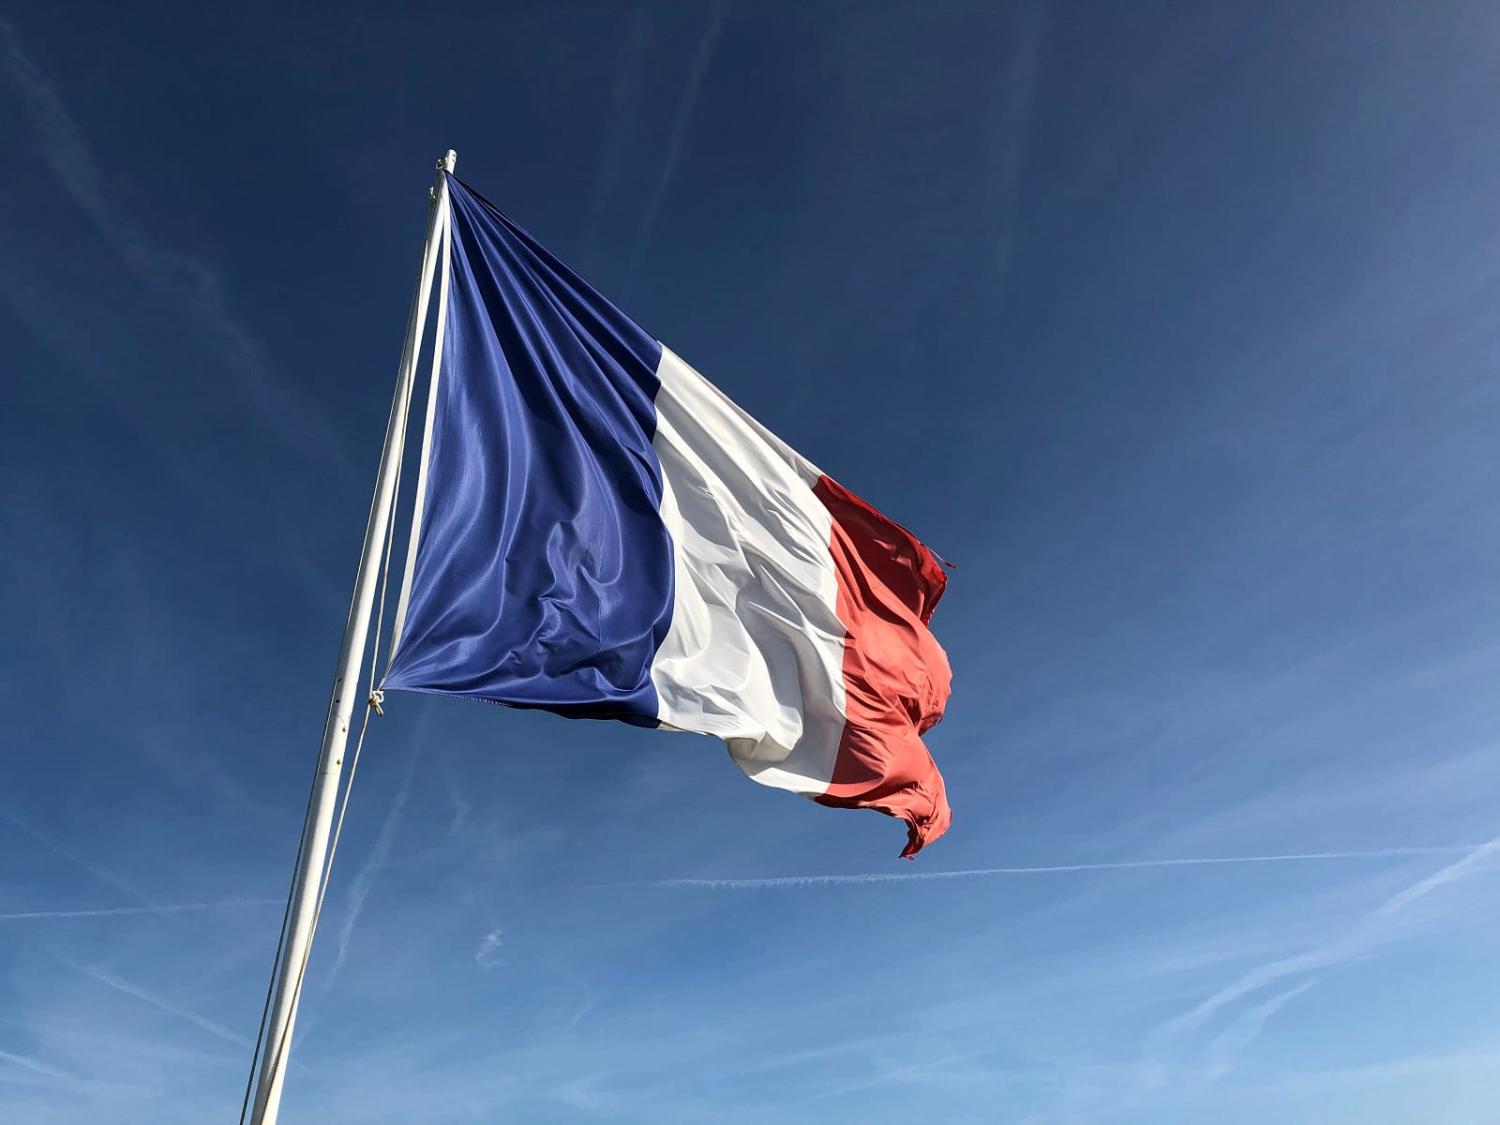 France has territories and significant economic, military and strategic interests in the Indo-Pacific region (Anthony Choren/Unsplash)